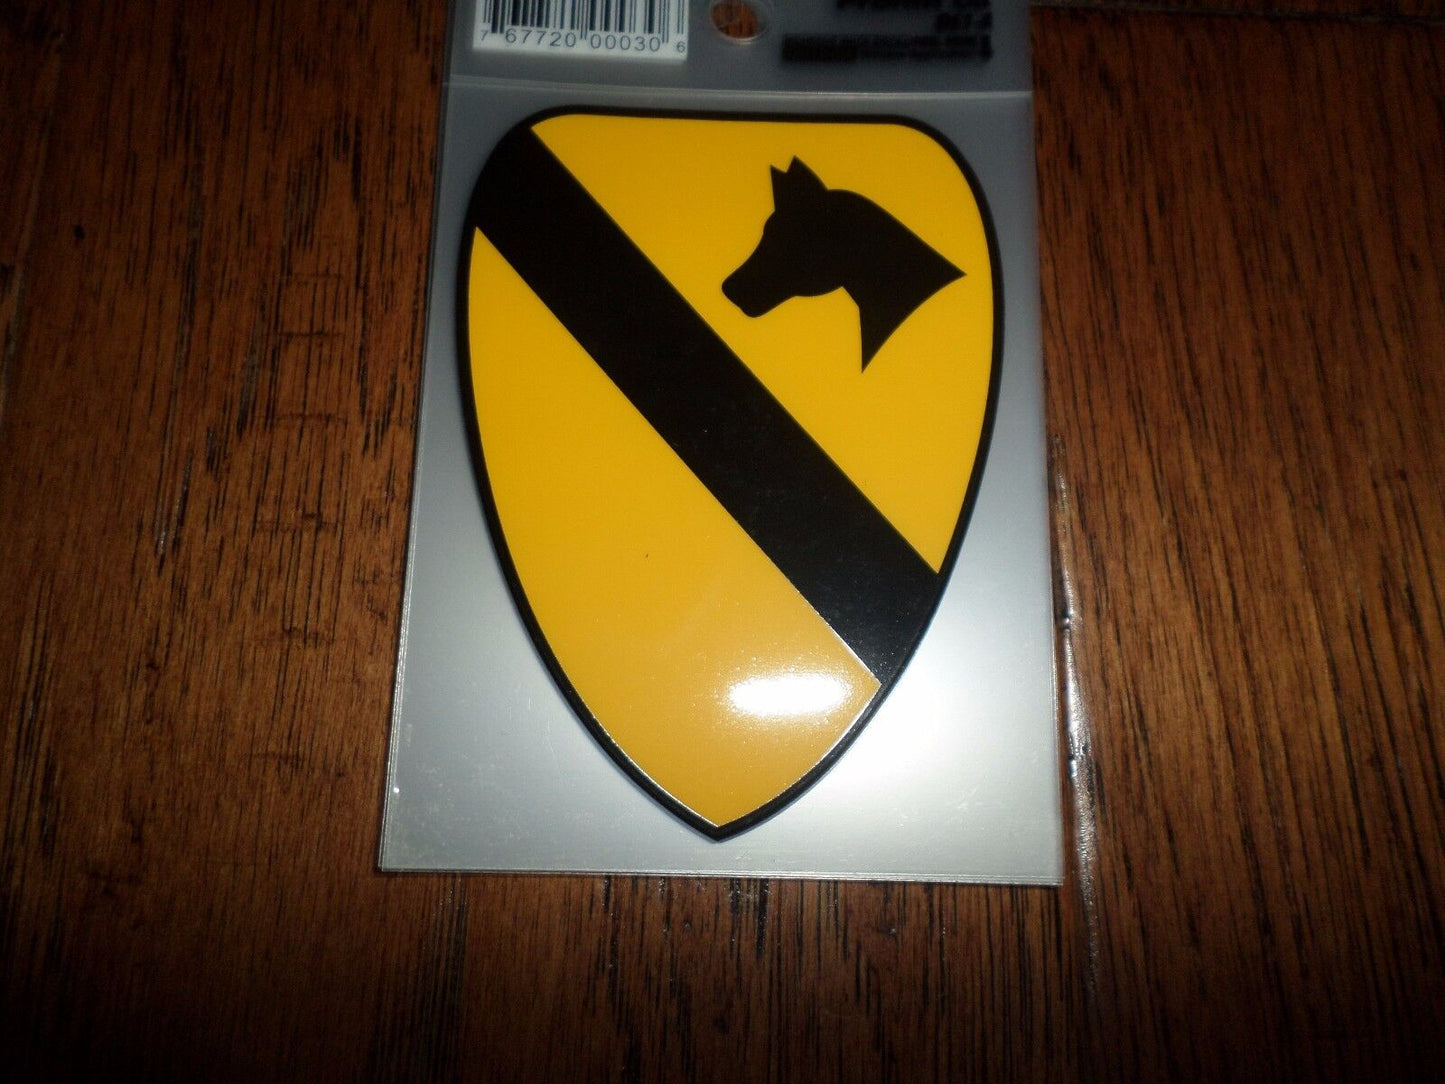 U.S MILITARY ARMY 1ST CAVALRY WINDOW DECAL STICKER. 1ST CAV DIVISION